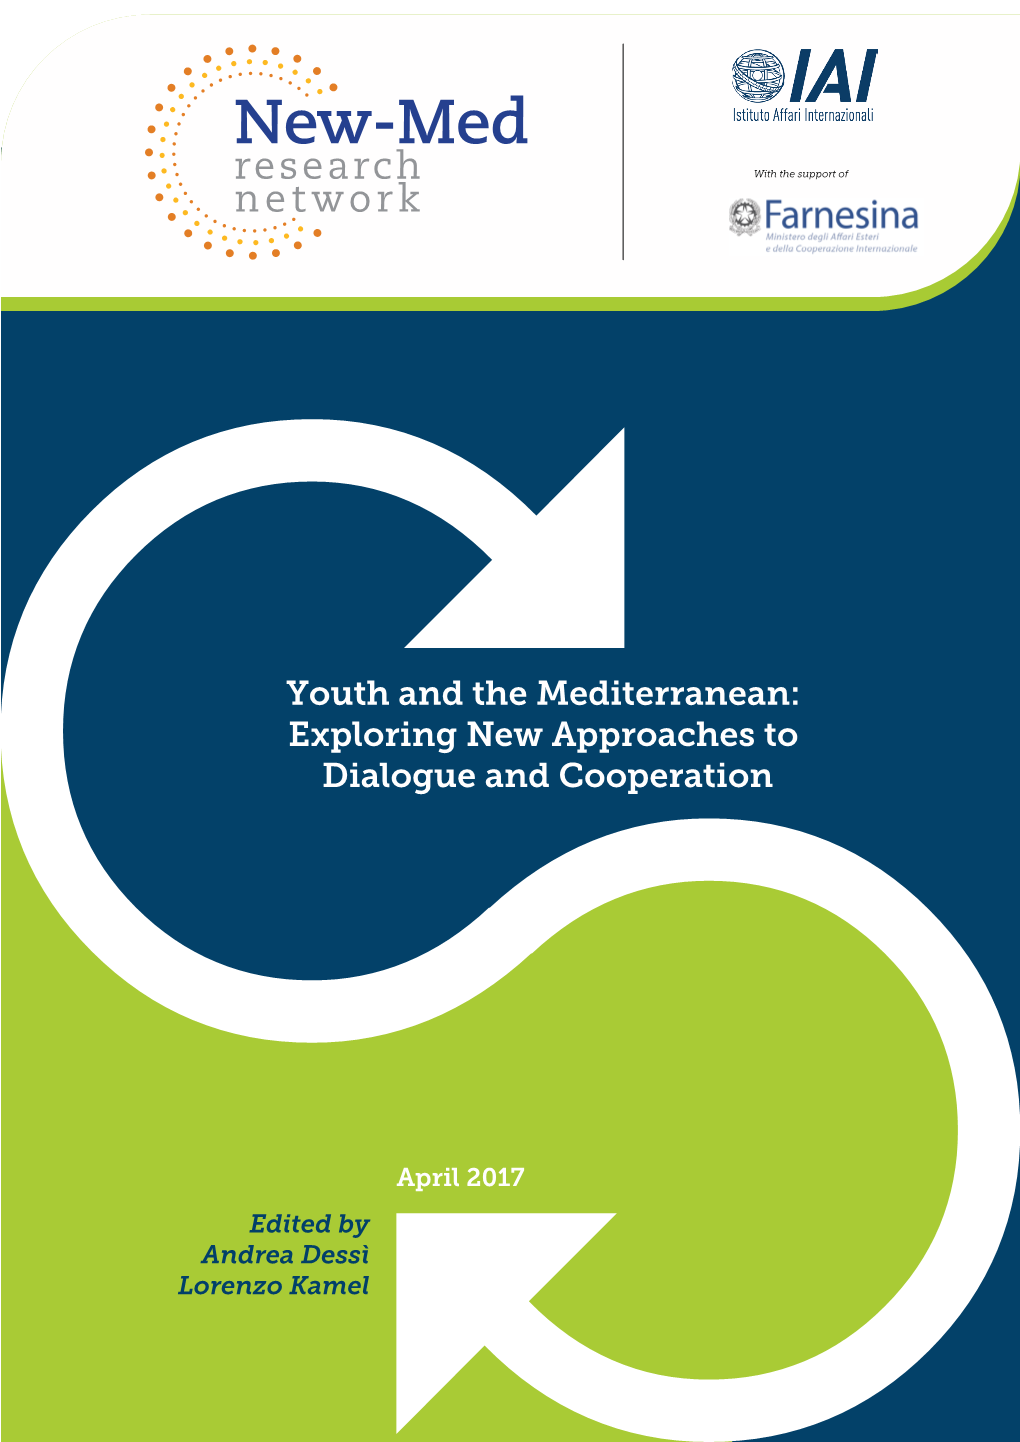 Youth and the Mediterranean: Exploring New Approaches to Dialogue and Cooperation